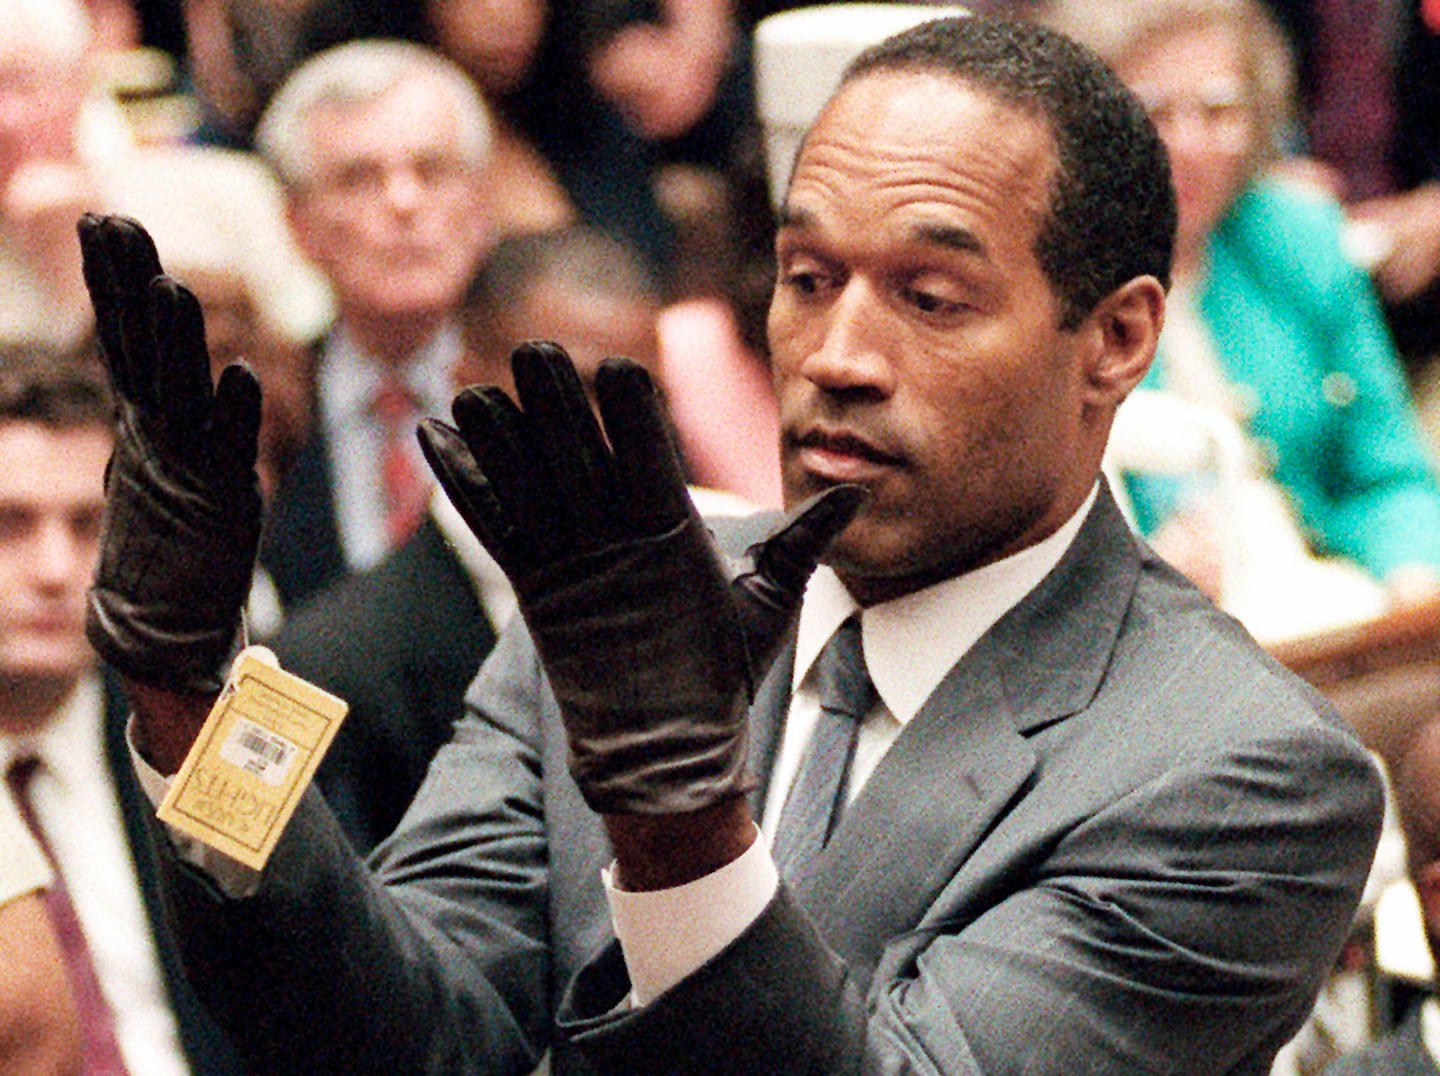 A history lesson for the kids: Why the O.J. Simpson trial was such a big deal